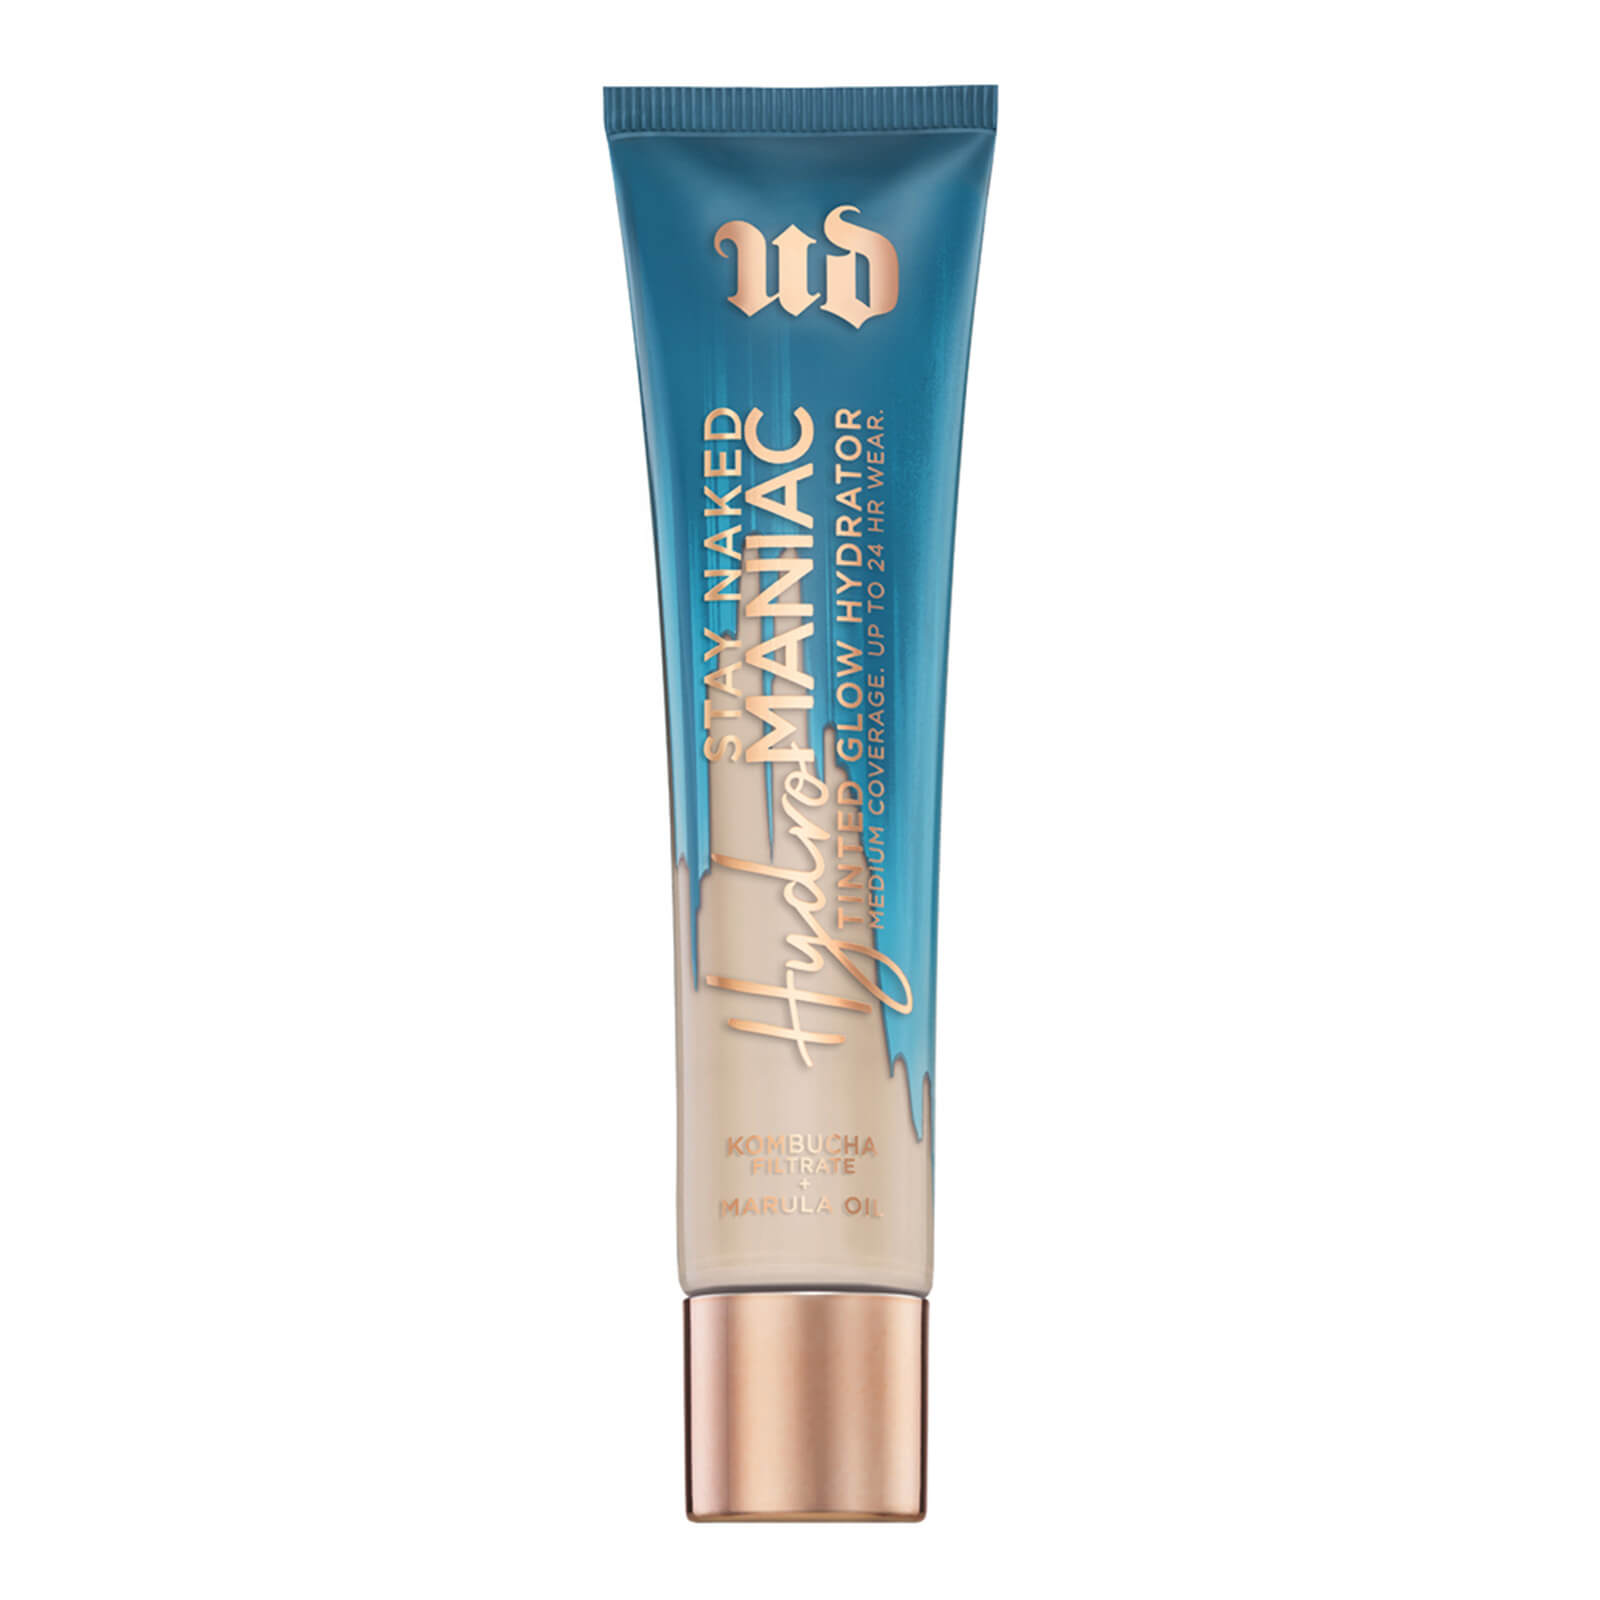 Image of Urban Decay Stay Naked Hydromaniac Tinted Glow Hydrator 35ml (Various Shades) - 10